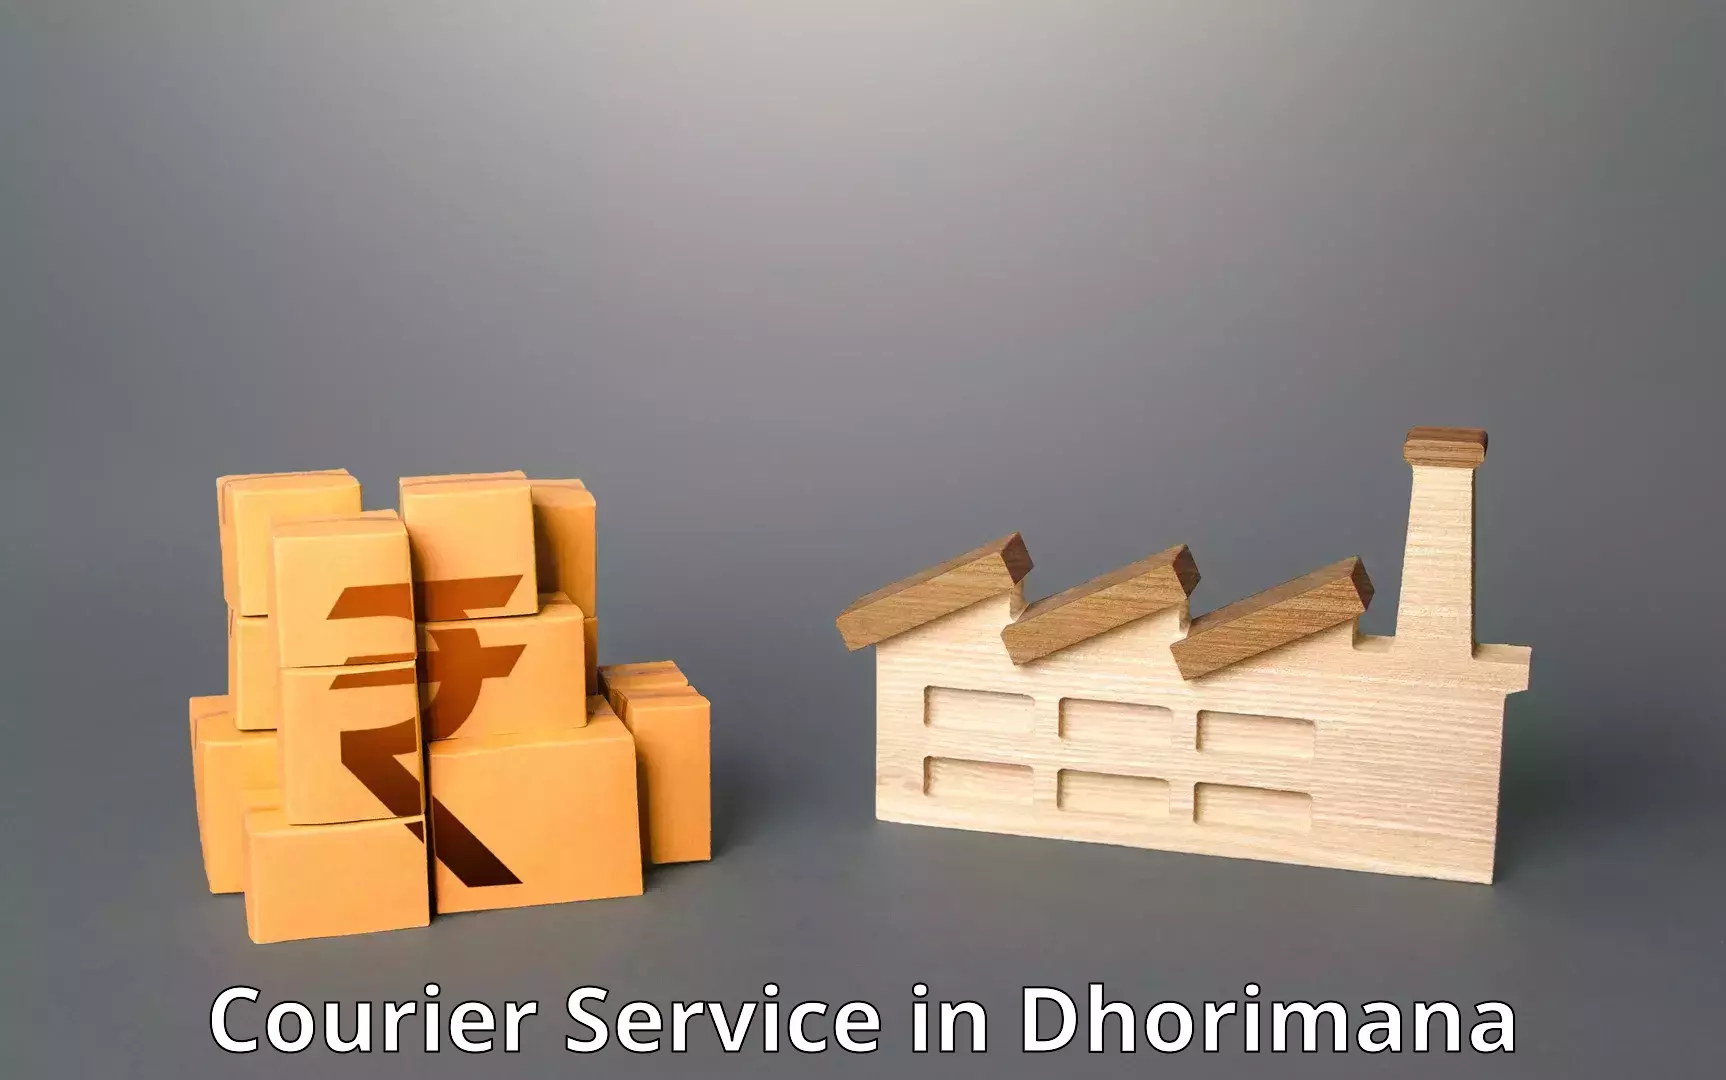 Tailored freight services in Dhorimana